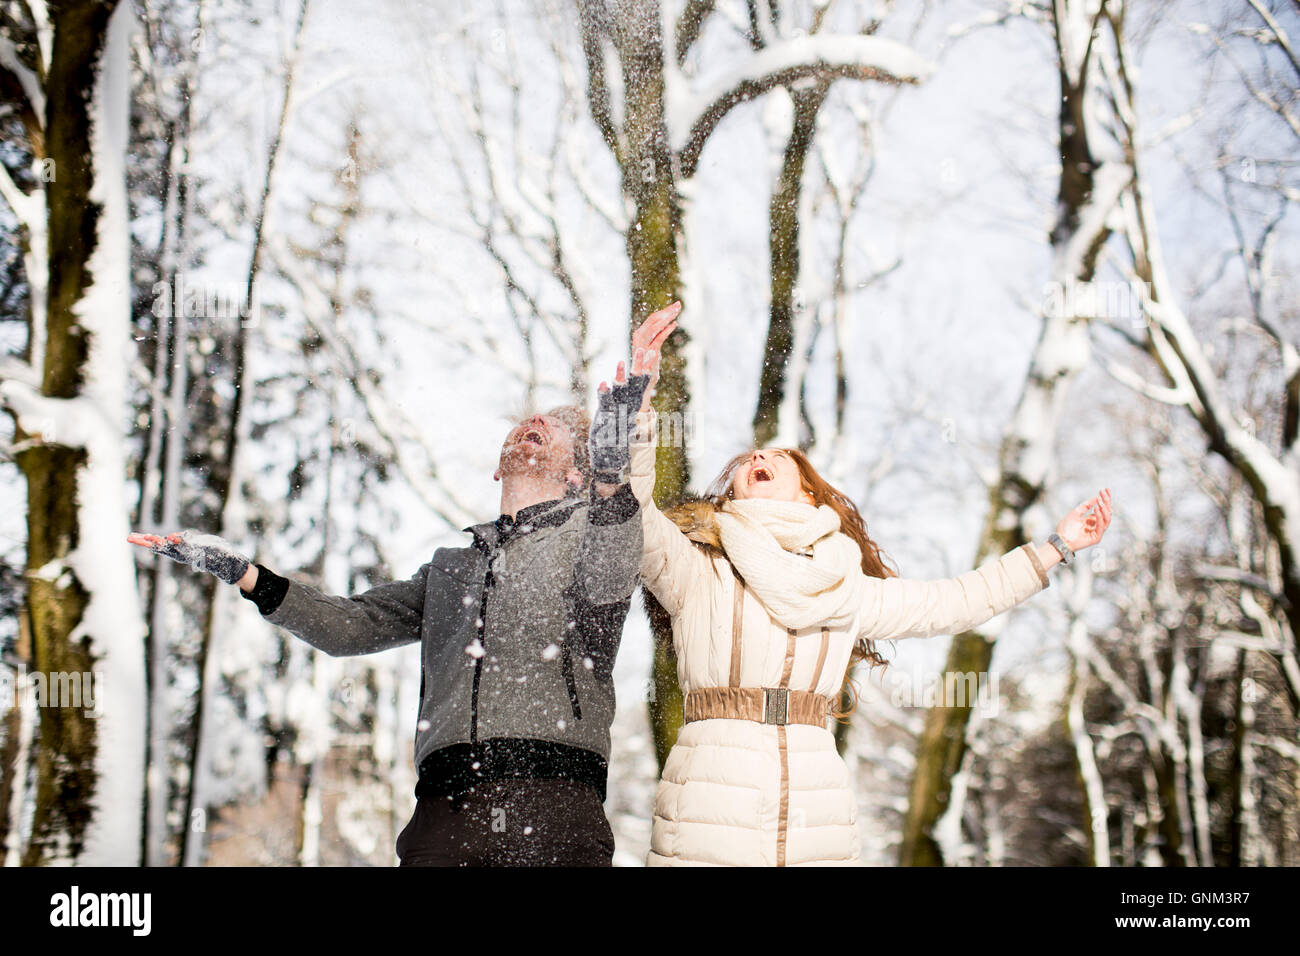 Young couple having fun in the snow in the park Stock Photo